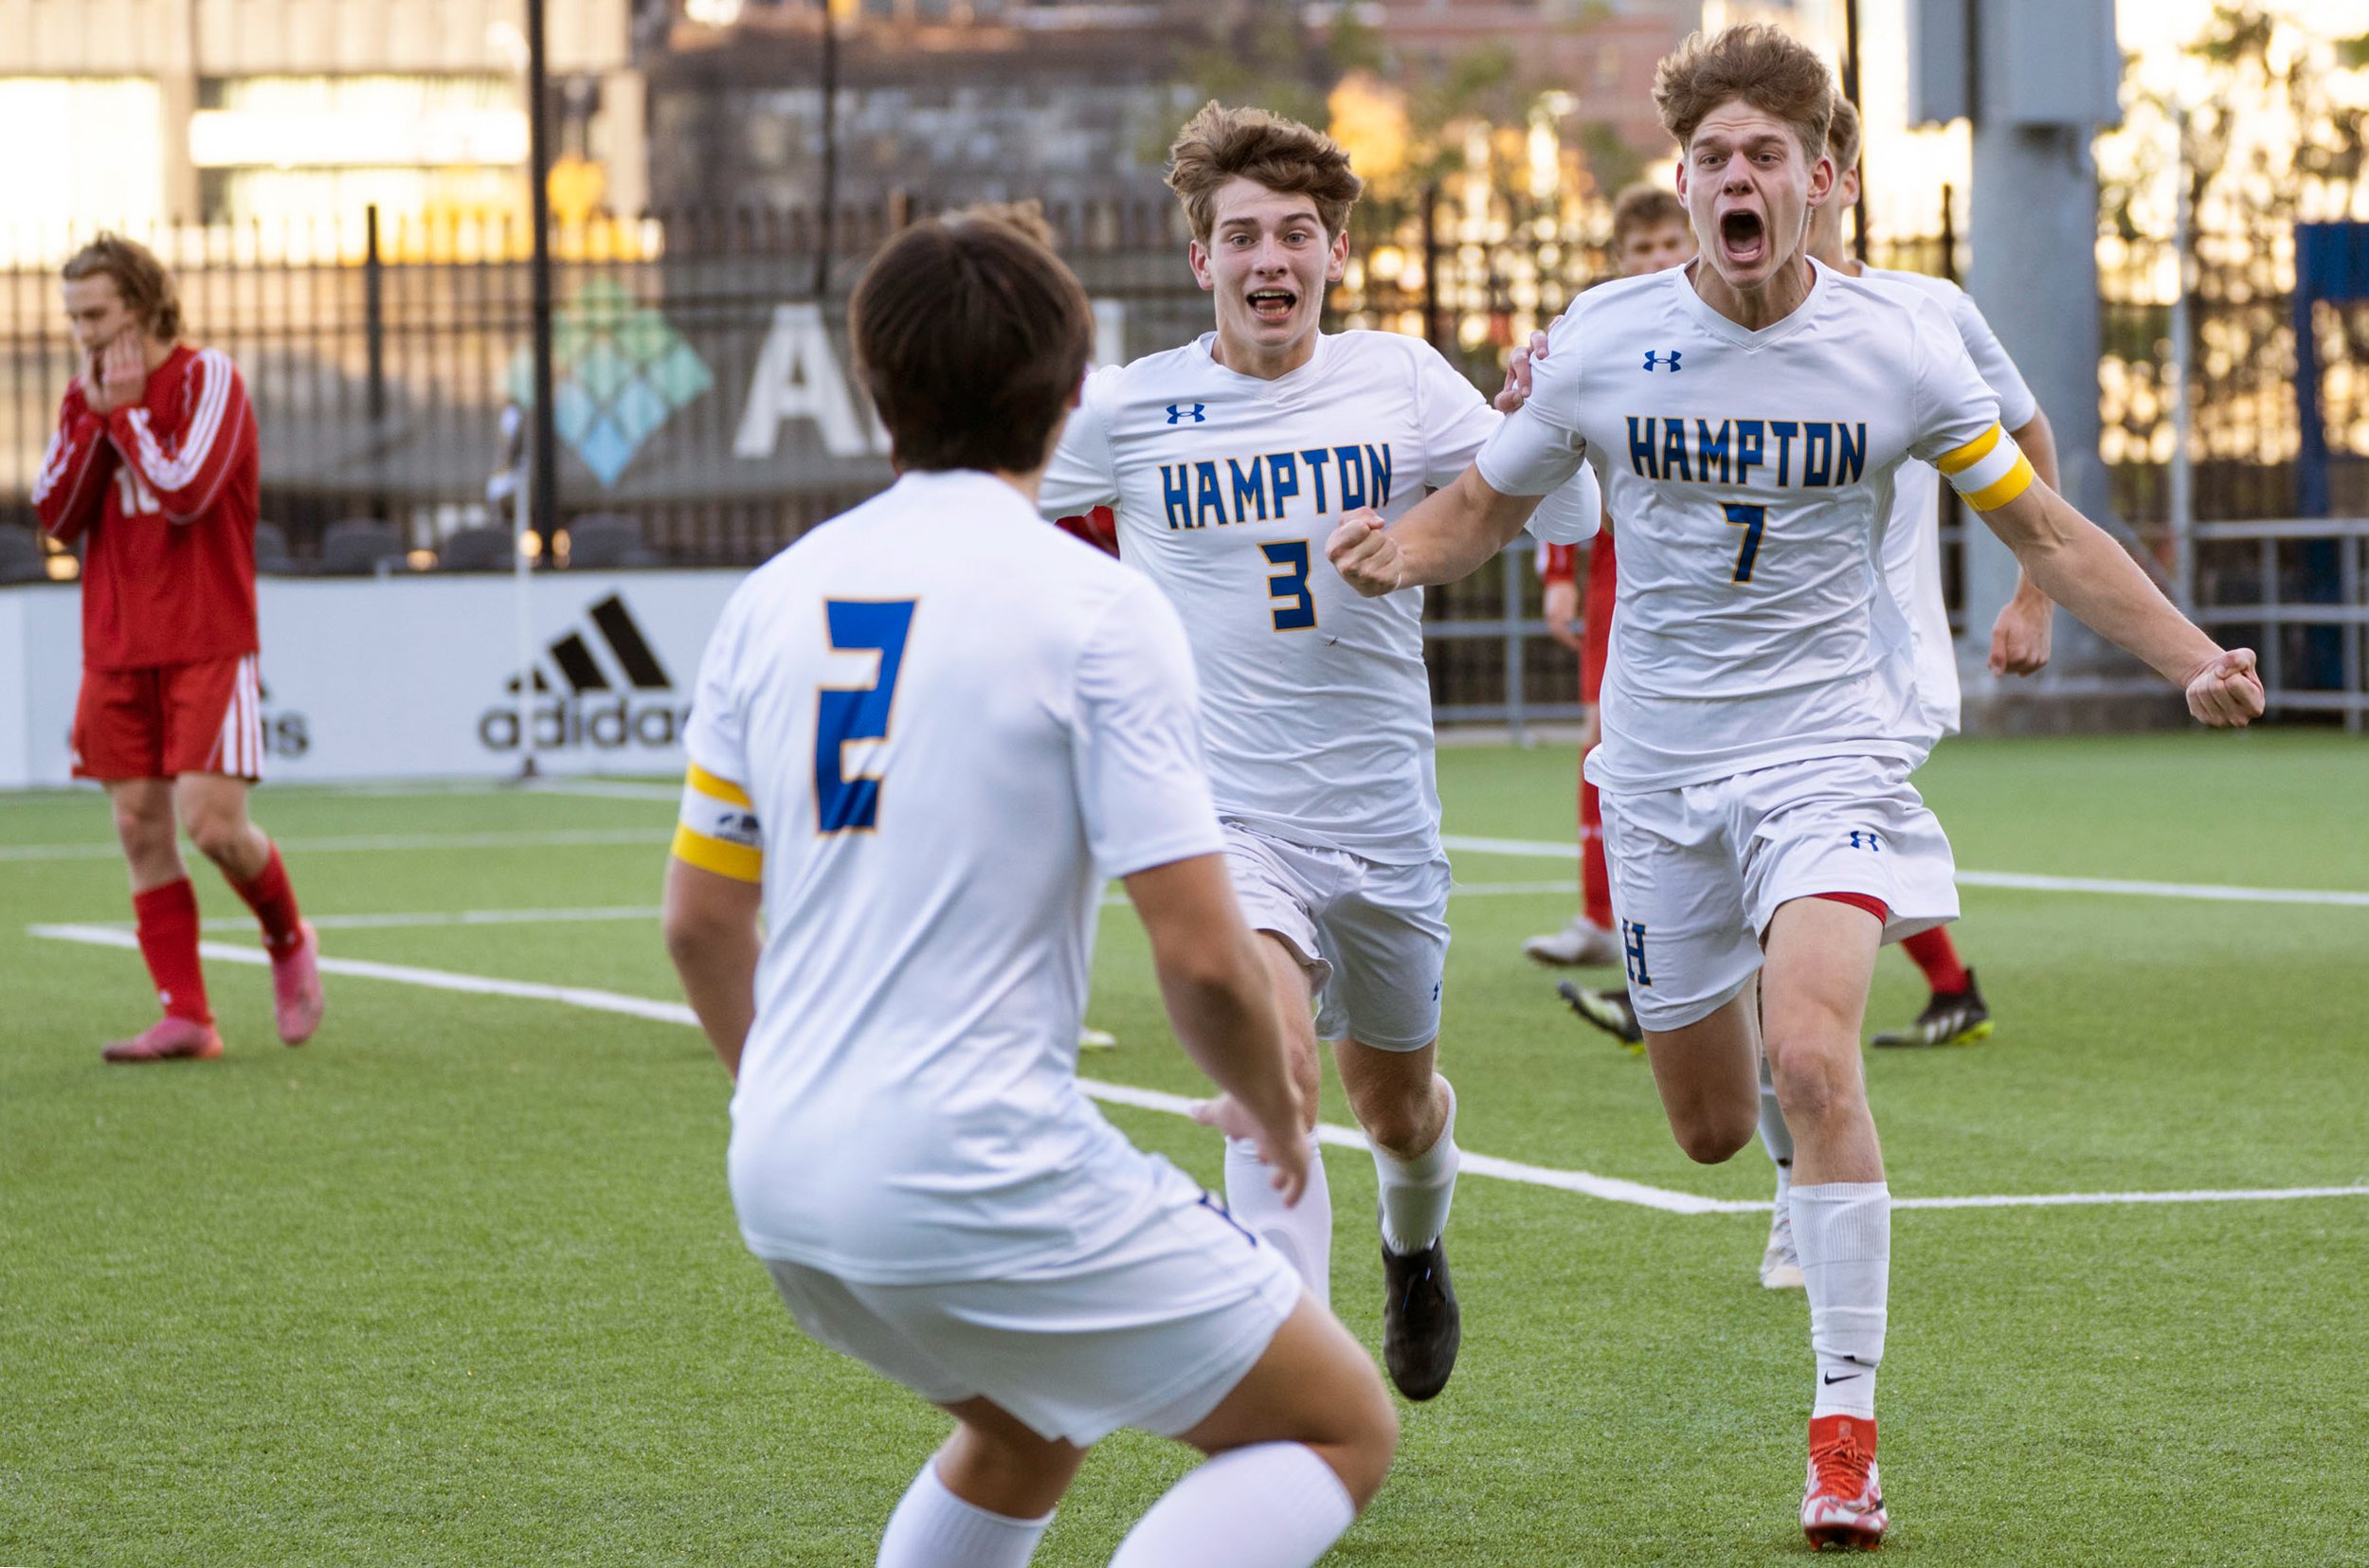  Hampton’s Zach Panza, right, celebrates with his team after scoring a goal during the 3A championship on Saturday, Nov. 6, 2021, at Highmark Stadium on the South Side of Pittsburgh. Hampton won 1-0. (Emily Matthews/Post-Gazette) 